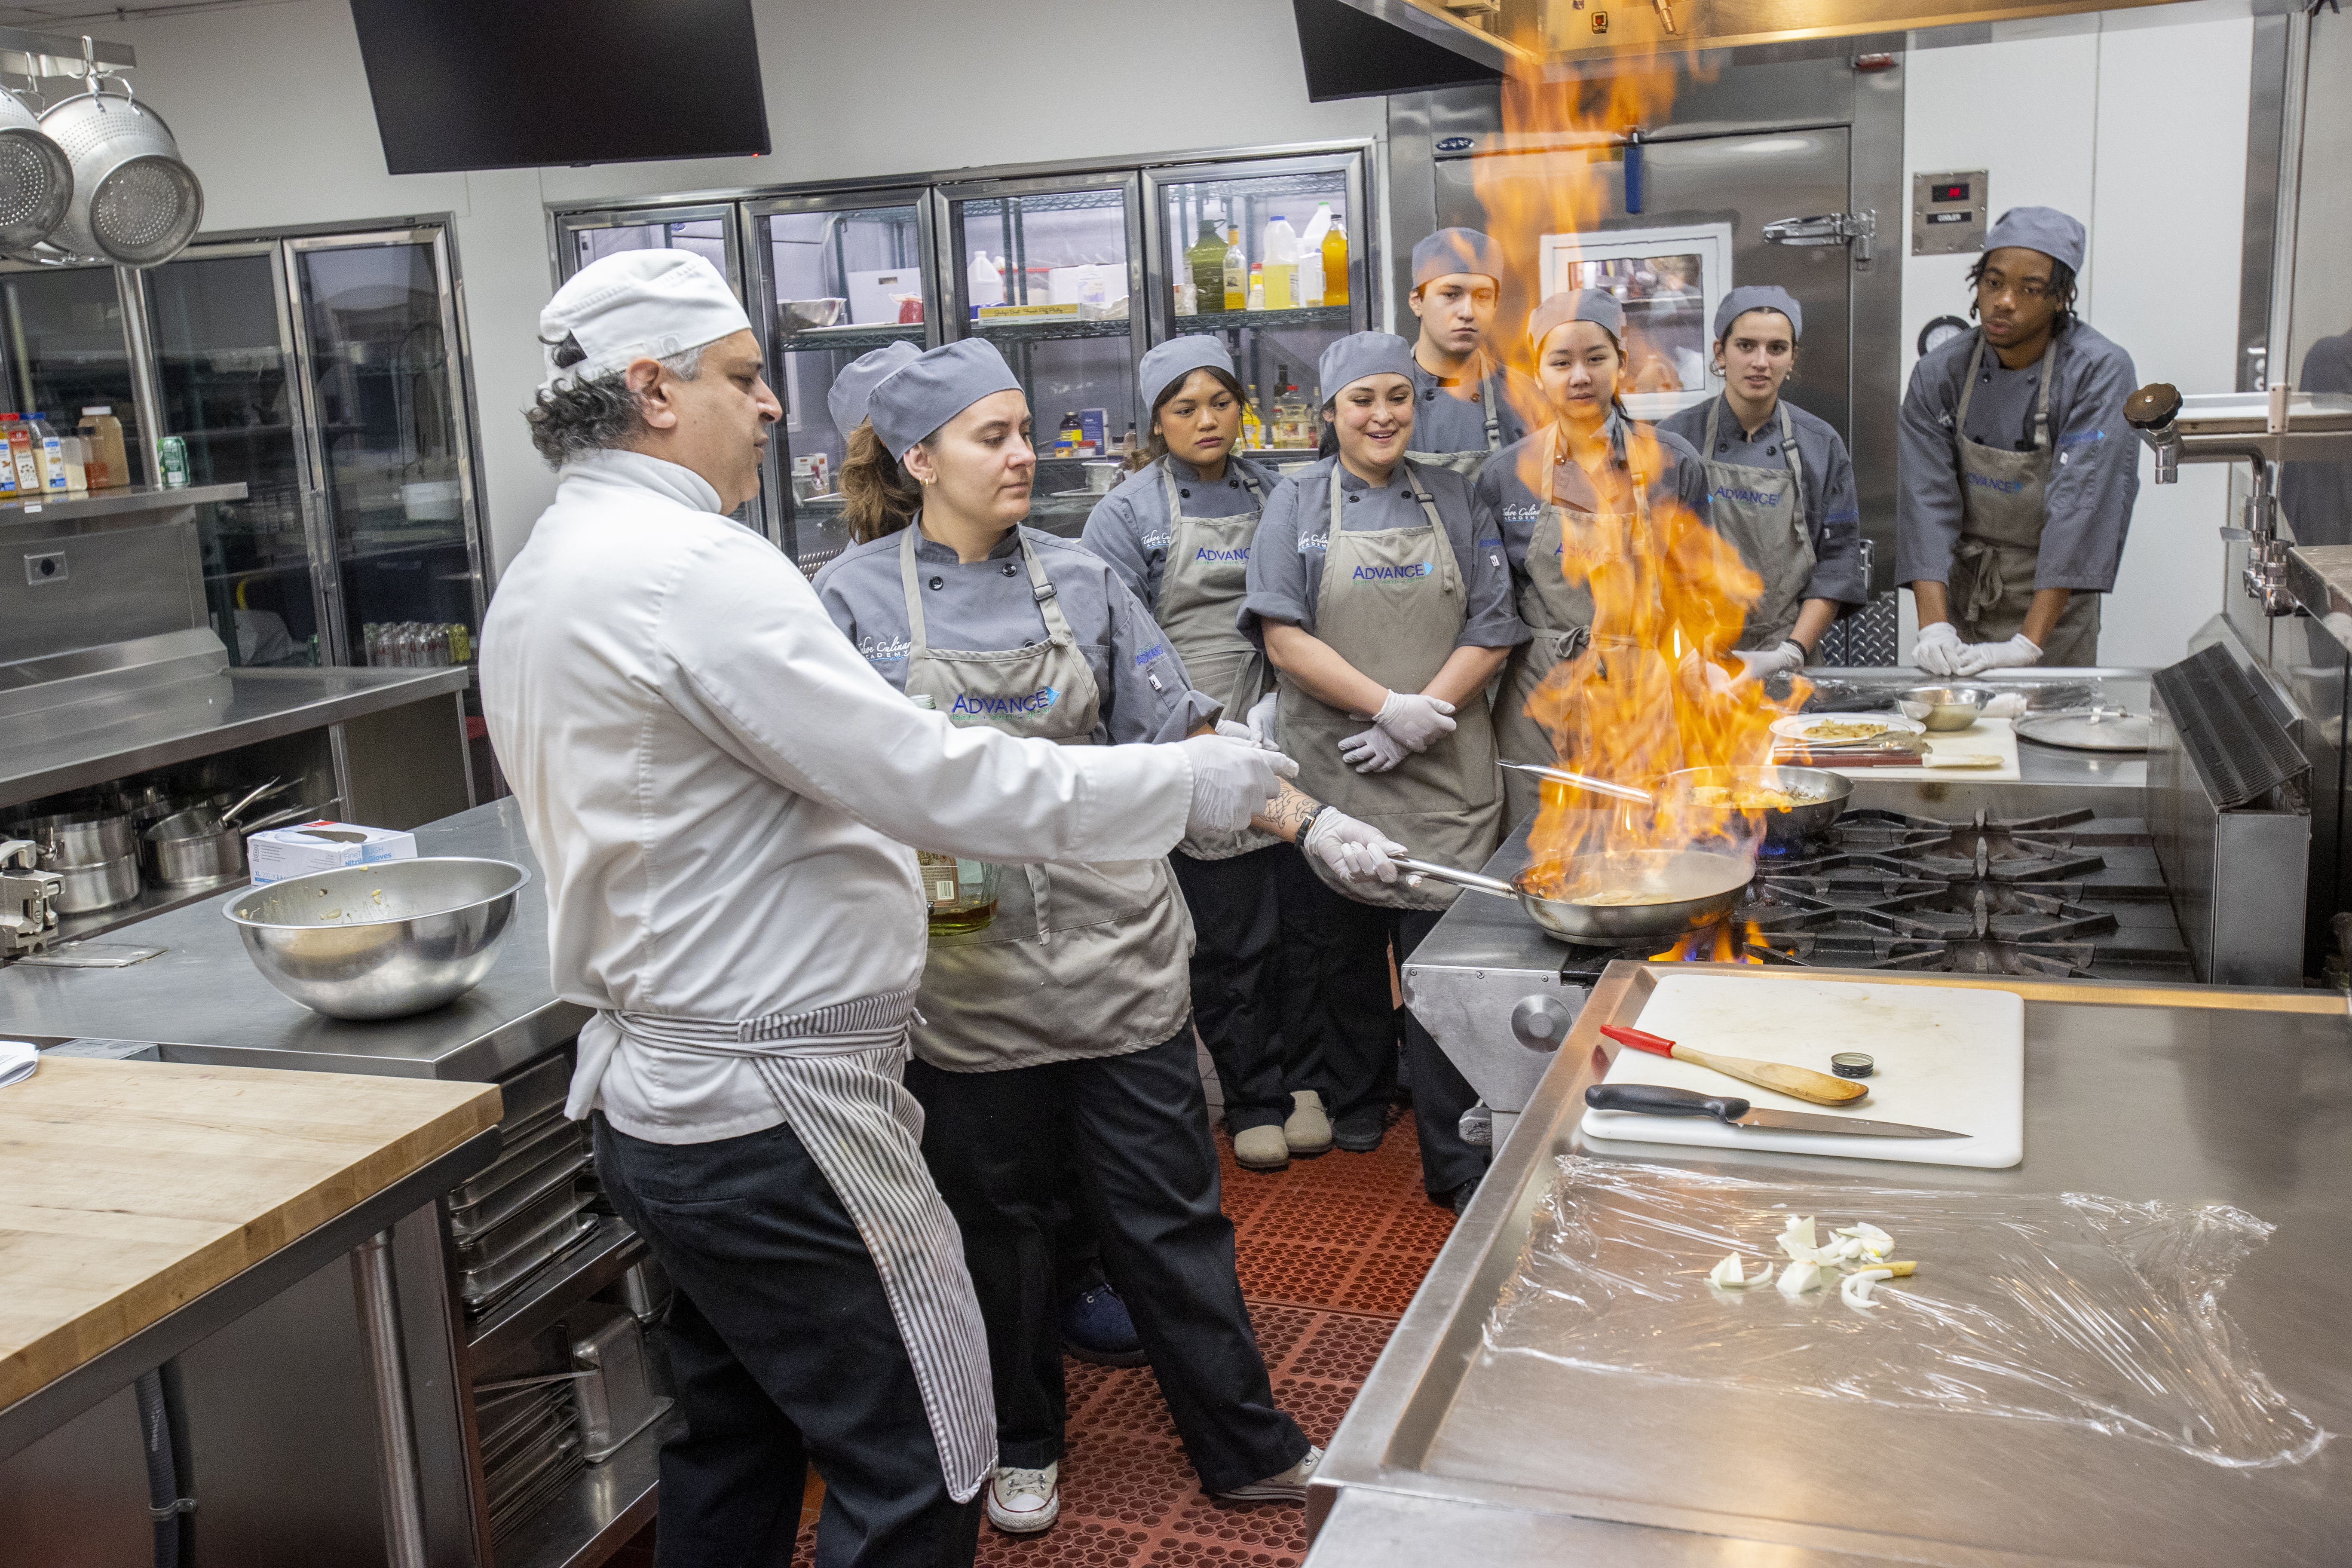 LTCC culinary arts studens stoked on fire